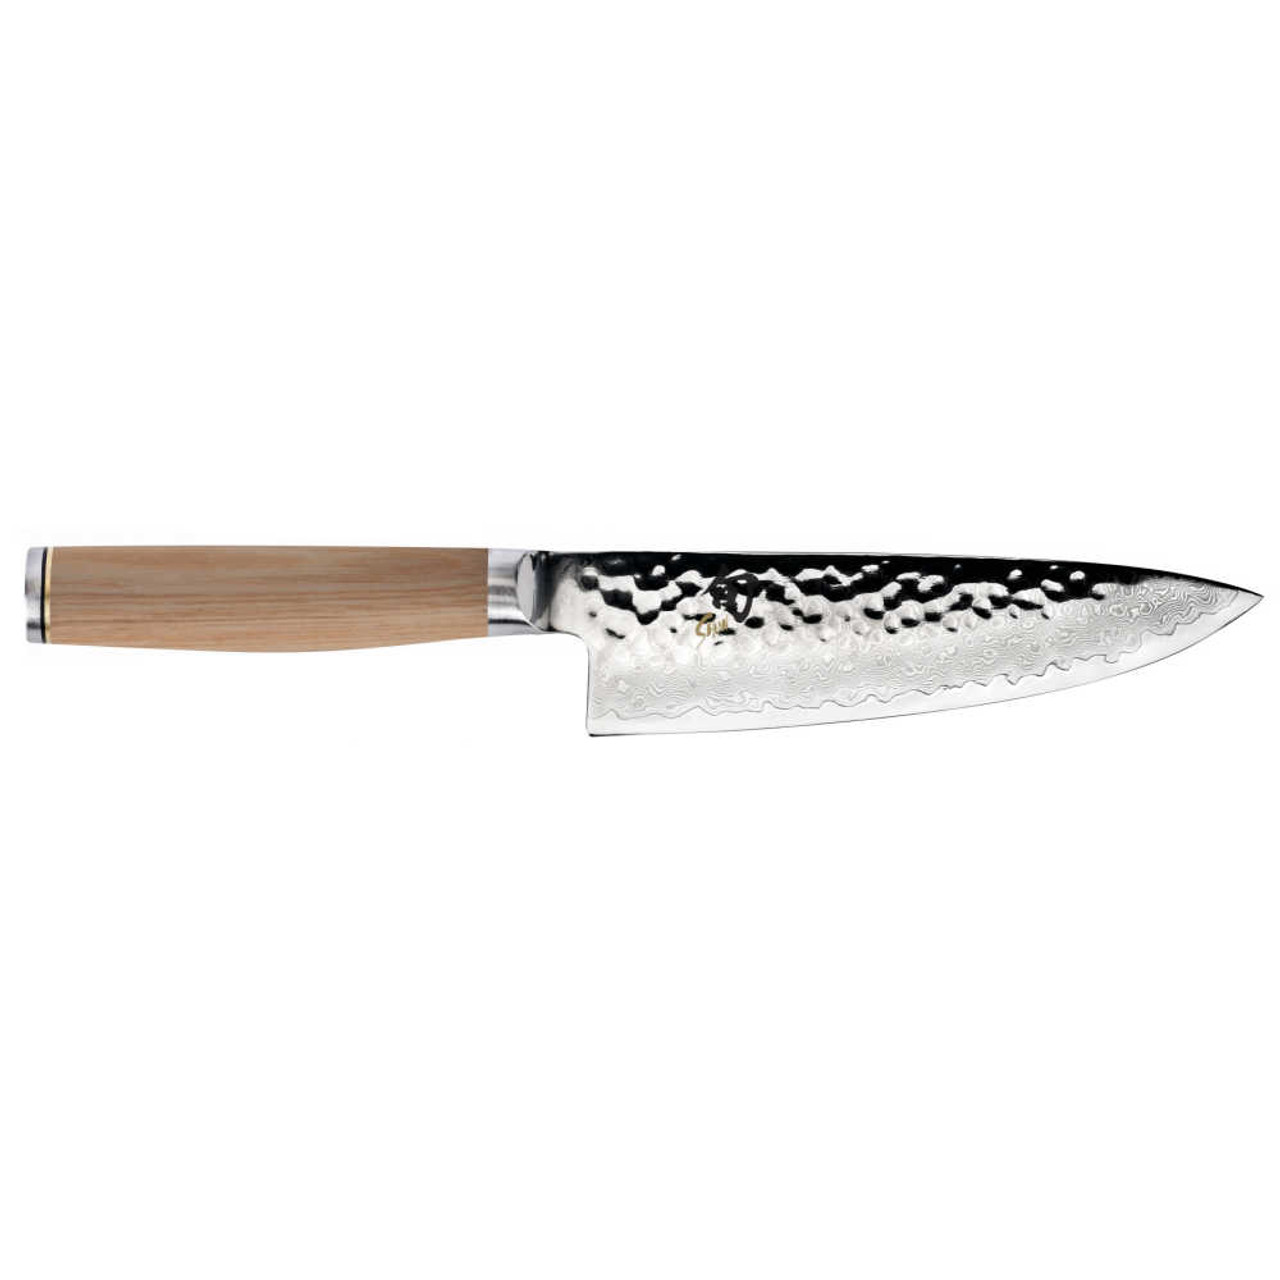 https://cdn11.bigcommerce.com/s-hccytny0od/images/stencil/1280x1280/products/4485/17771/Shun_Premier_Blonde_Chefs_Knife__55179.1644596297.jpg?c=2?imbypass=on